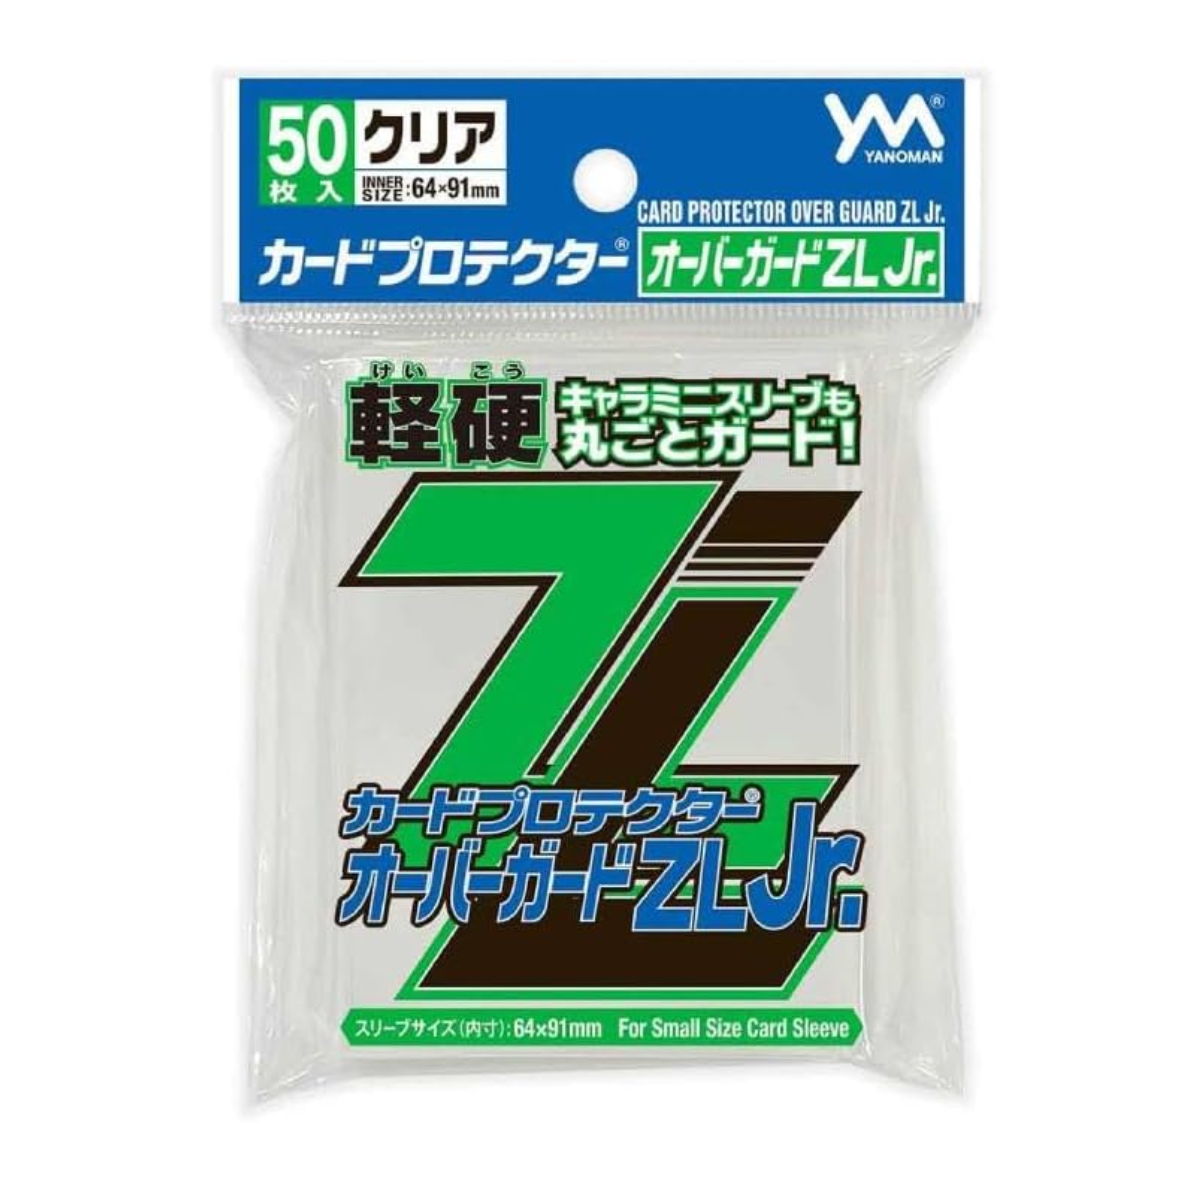 Yanoman Sleeve Card Protector Over Guard Z L Sleeve - Japanese Size - (New)-Yanoman-Ace Cards & Collectibles